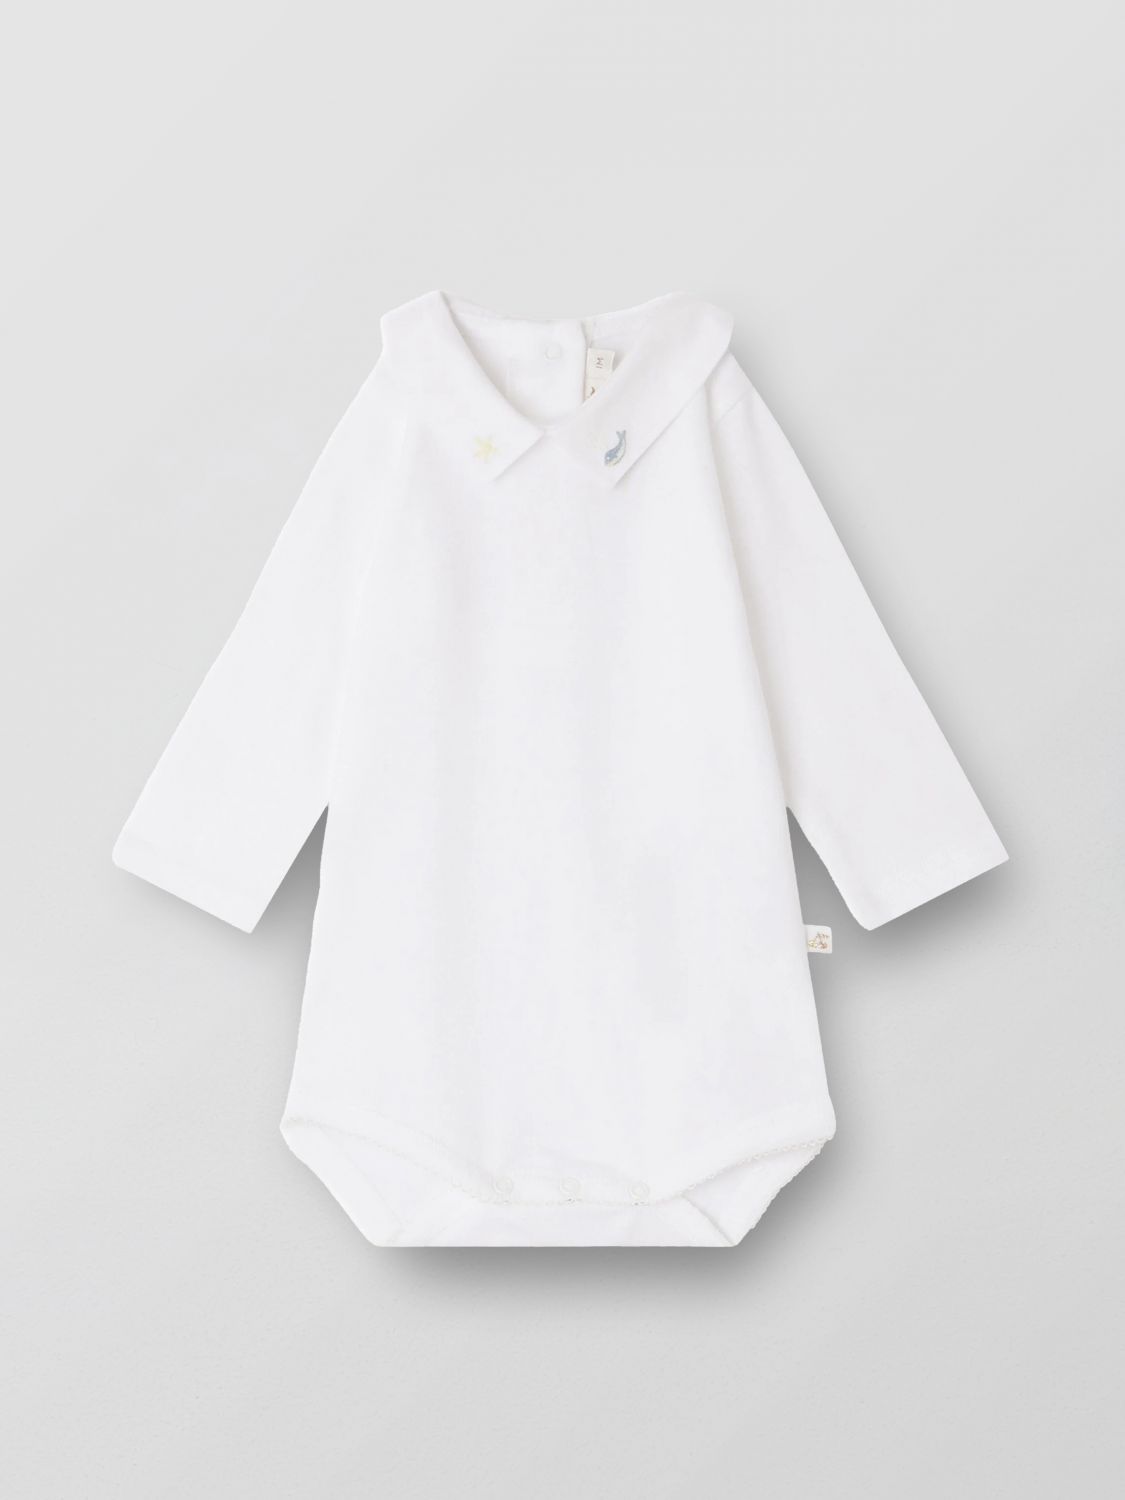 Bonpoint Babies' Tracksuits  Kids In White